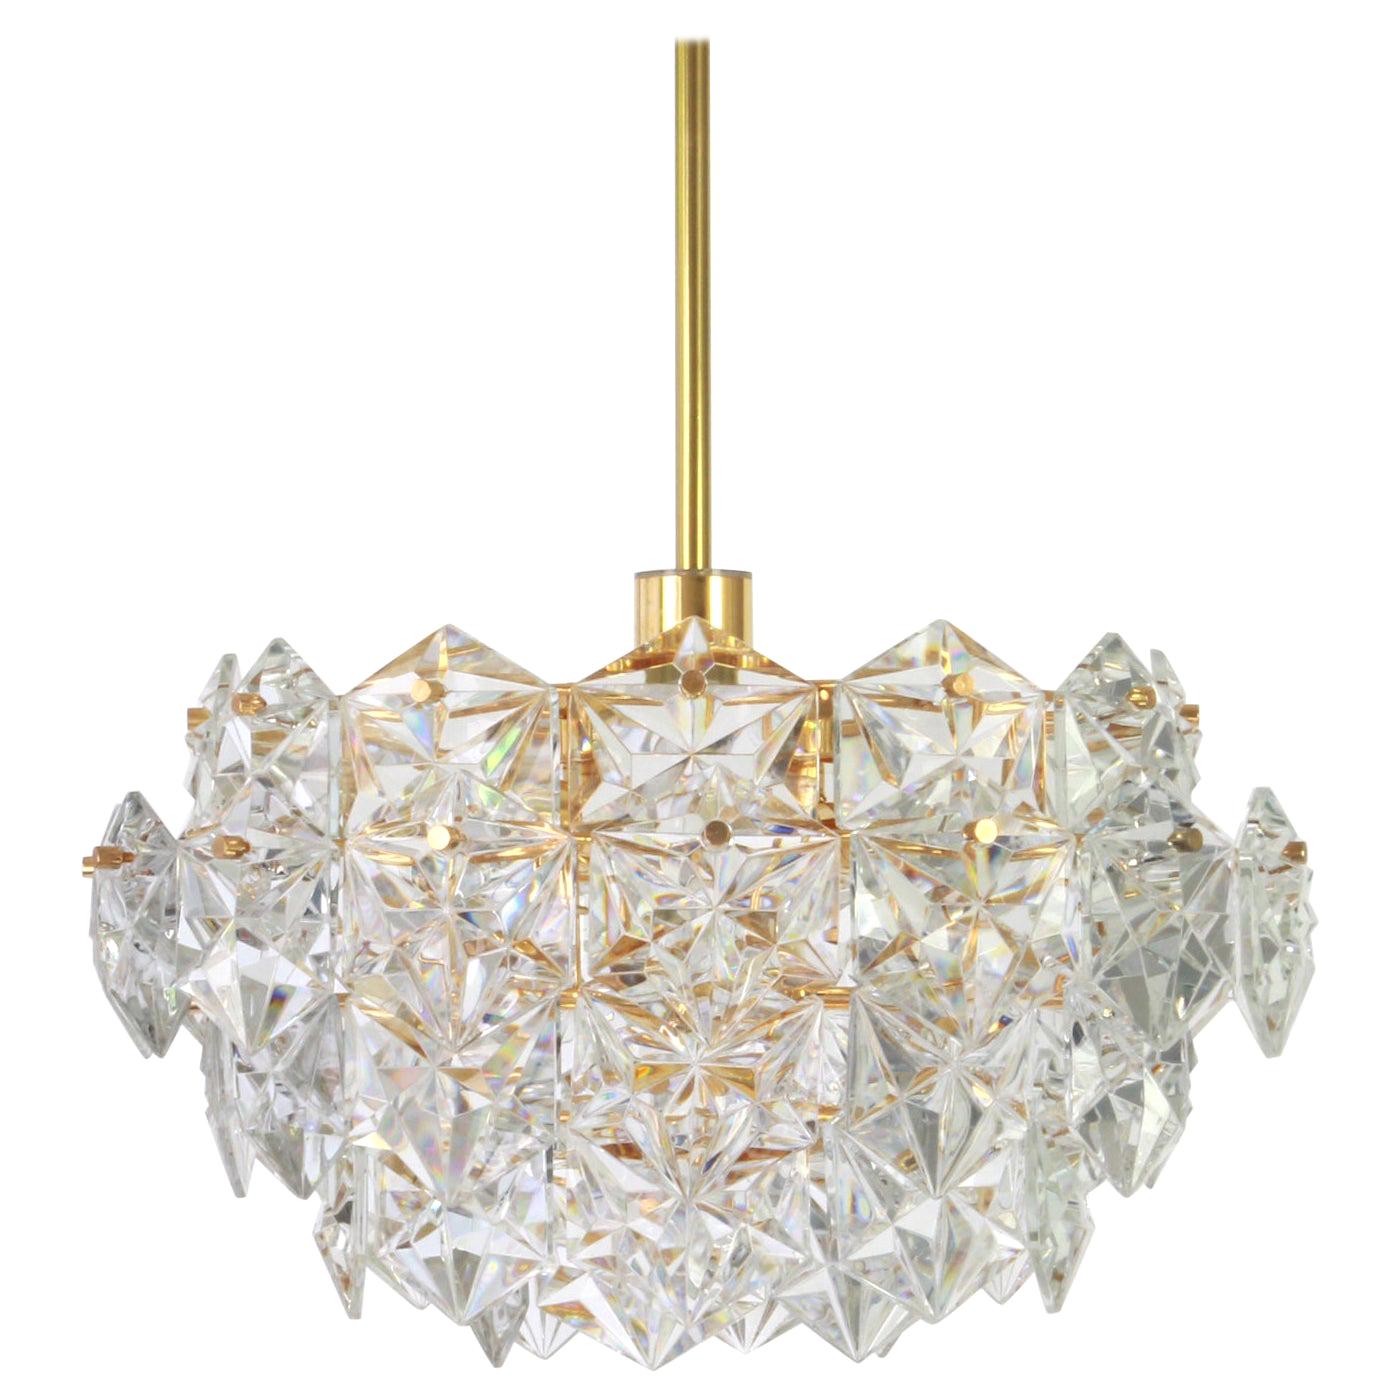 A stunning five-tier chandelier by Kinkeldey, Germany, manufactured in circa 1970-1979. A handmade and high quality piece. The chandelier features a 24-karat gold-plated four-tier structure with lots of facetted crystal glass elements.

High